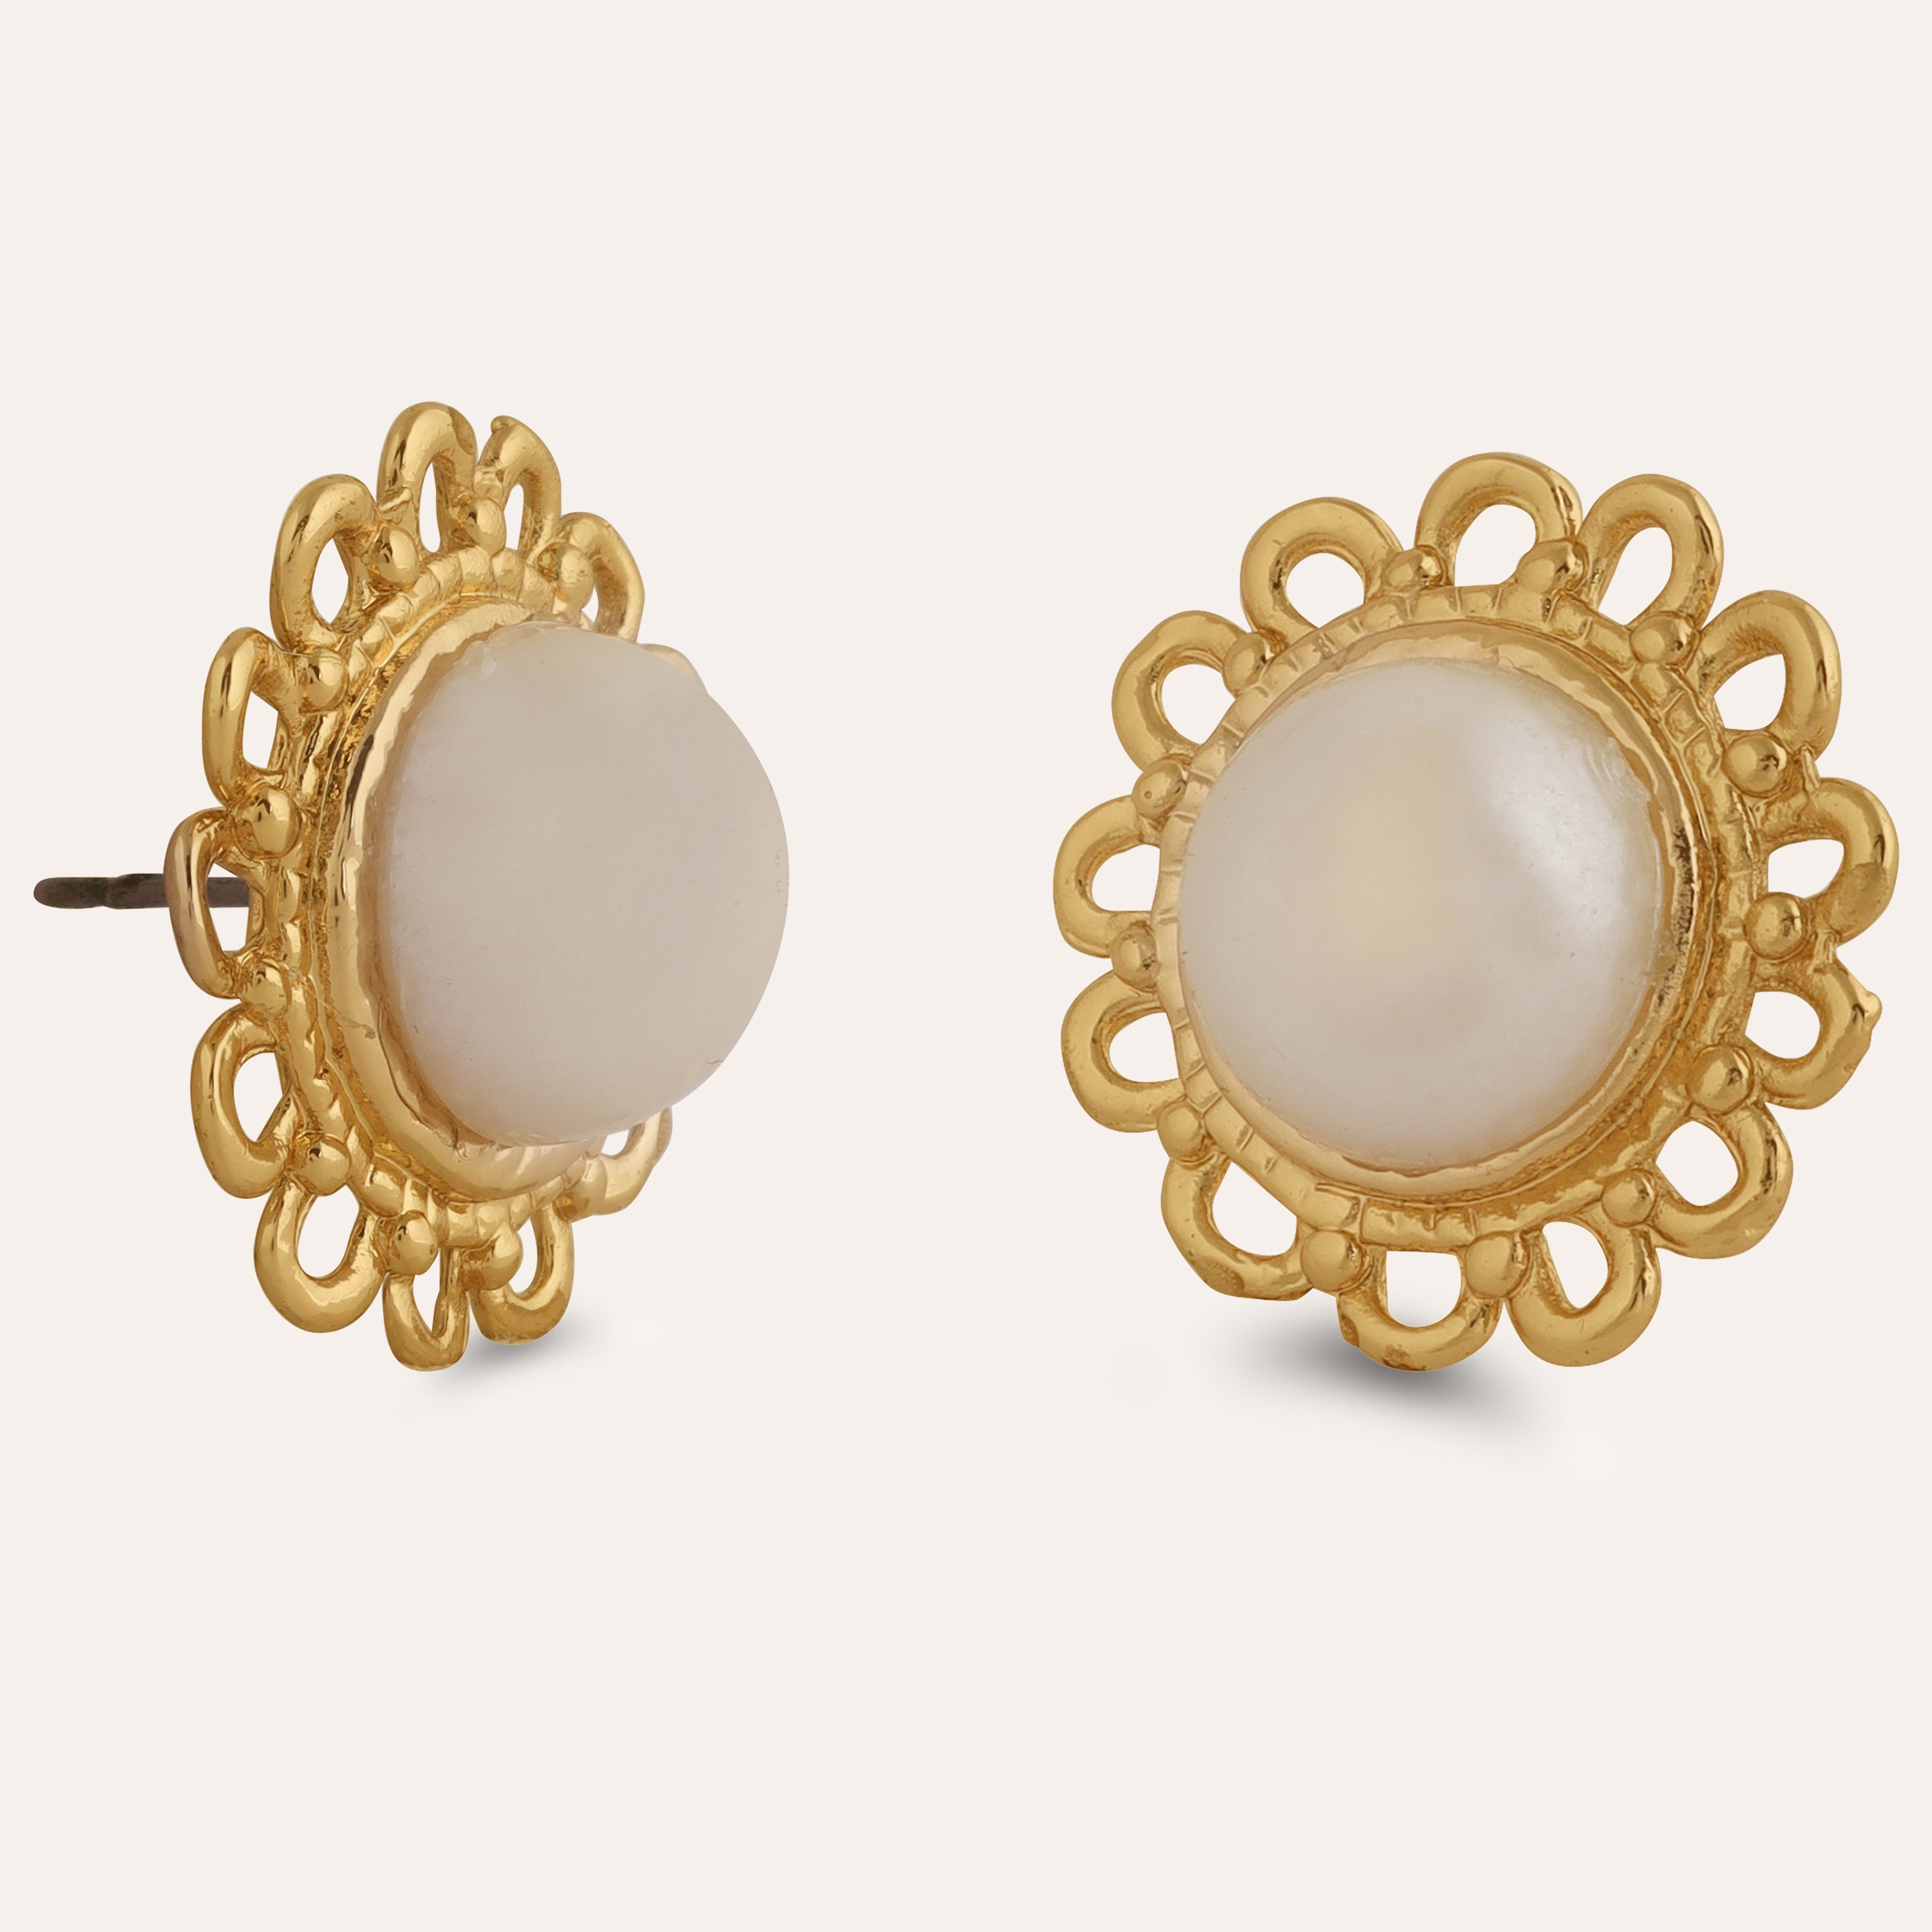 TFC Pearl Crown Gold Plated Stud Earrings-Discover daily wear gold earrings including stud earrings, hoop earrings, and pearl earrings, perfect as earrings for women and earrings for girls.Find the cheapest fashion jewellery which is anti-tarnis​h only at The Fun company